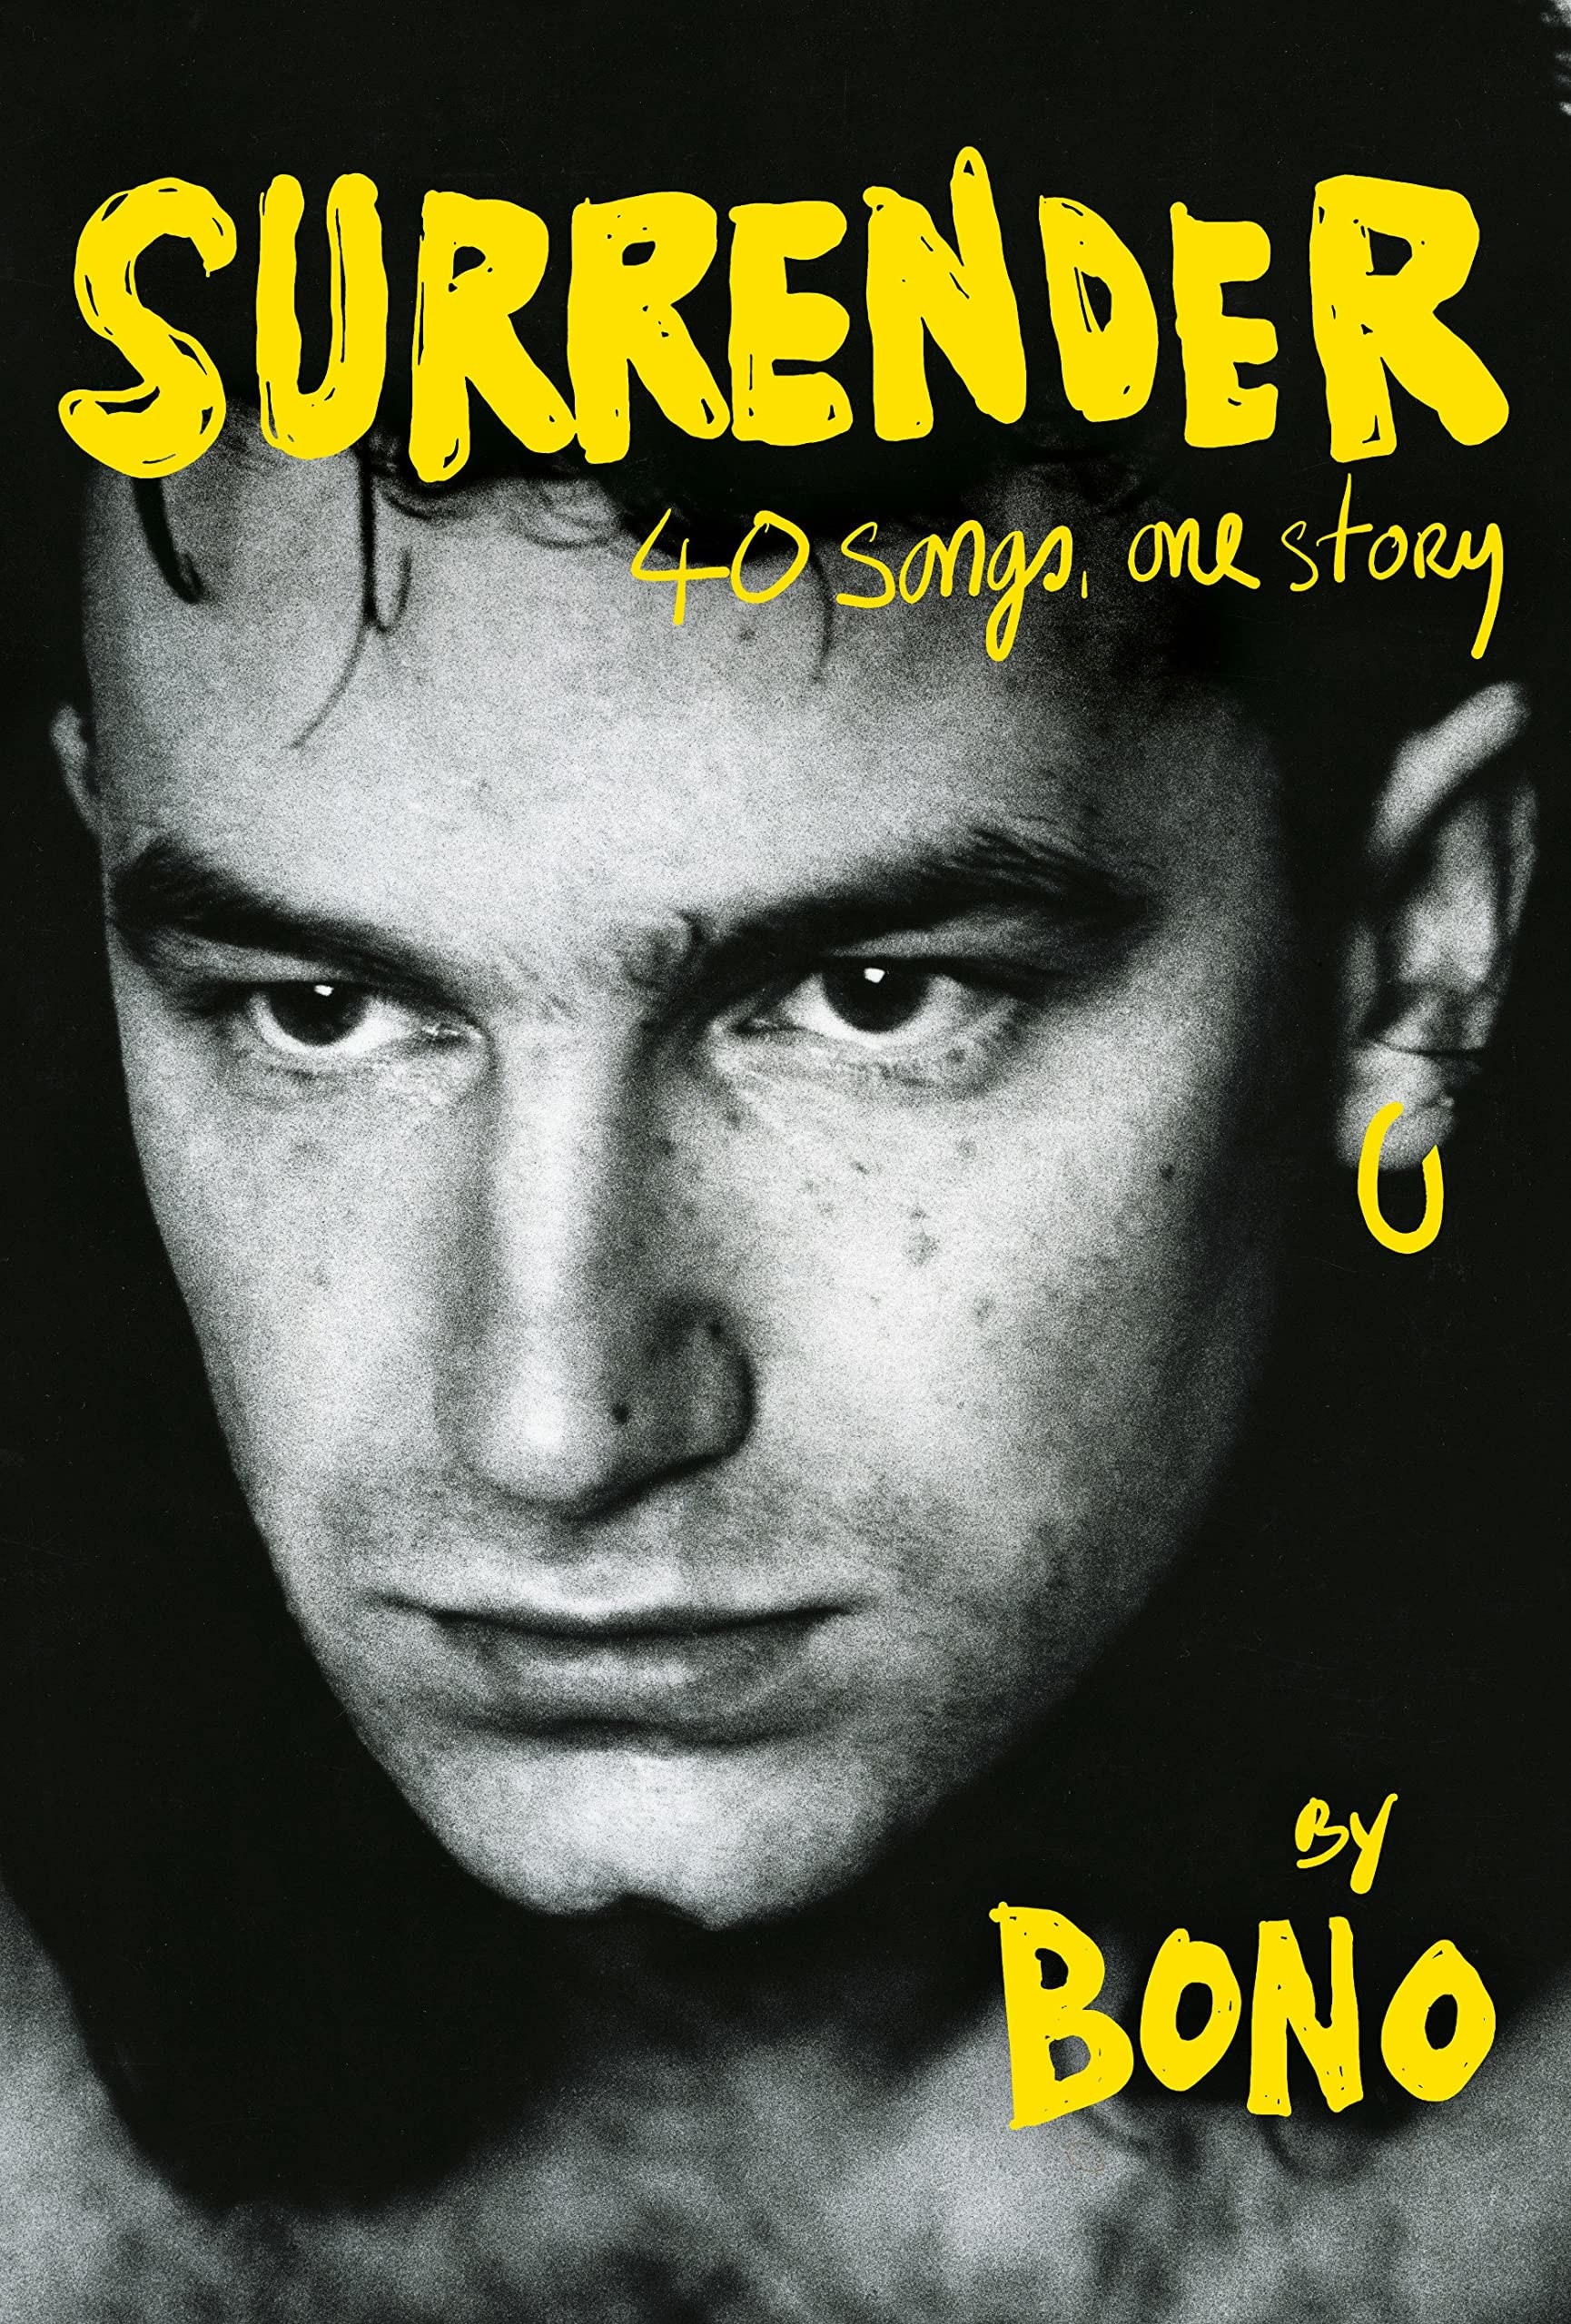 The cover of &quot;Surrender: 40 Songs, One Story&quot;